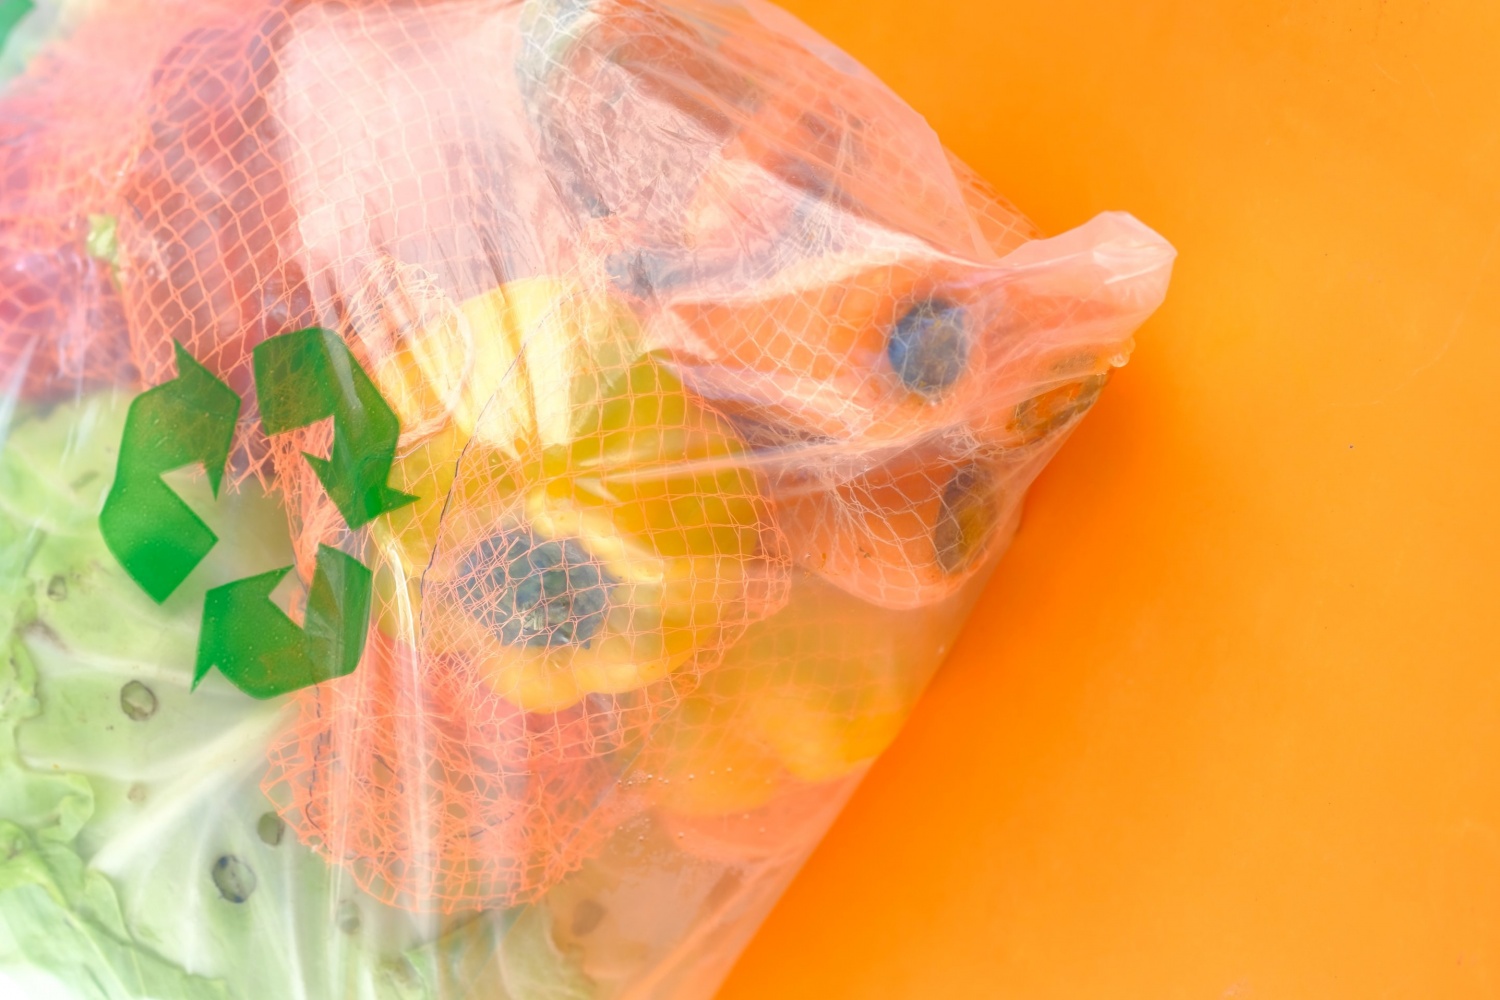 Plastic bag restriction in Colorado by 2024, 10 cent cost by January 1,